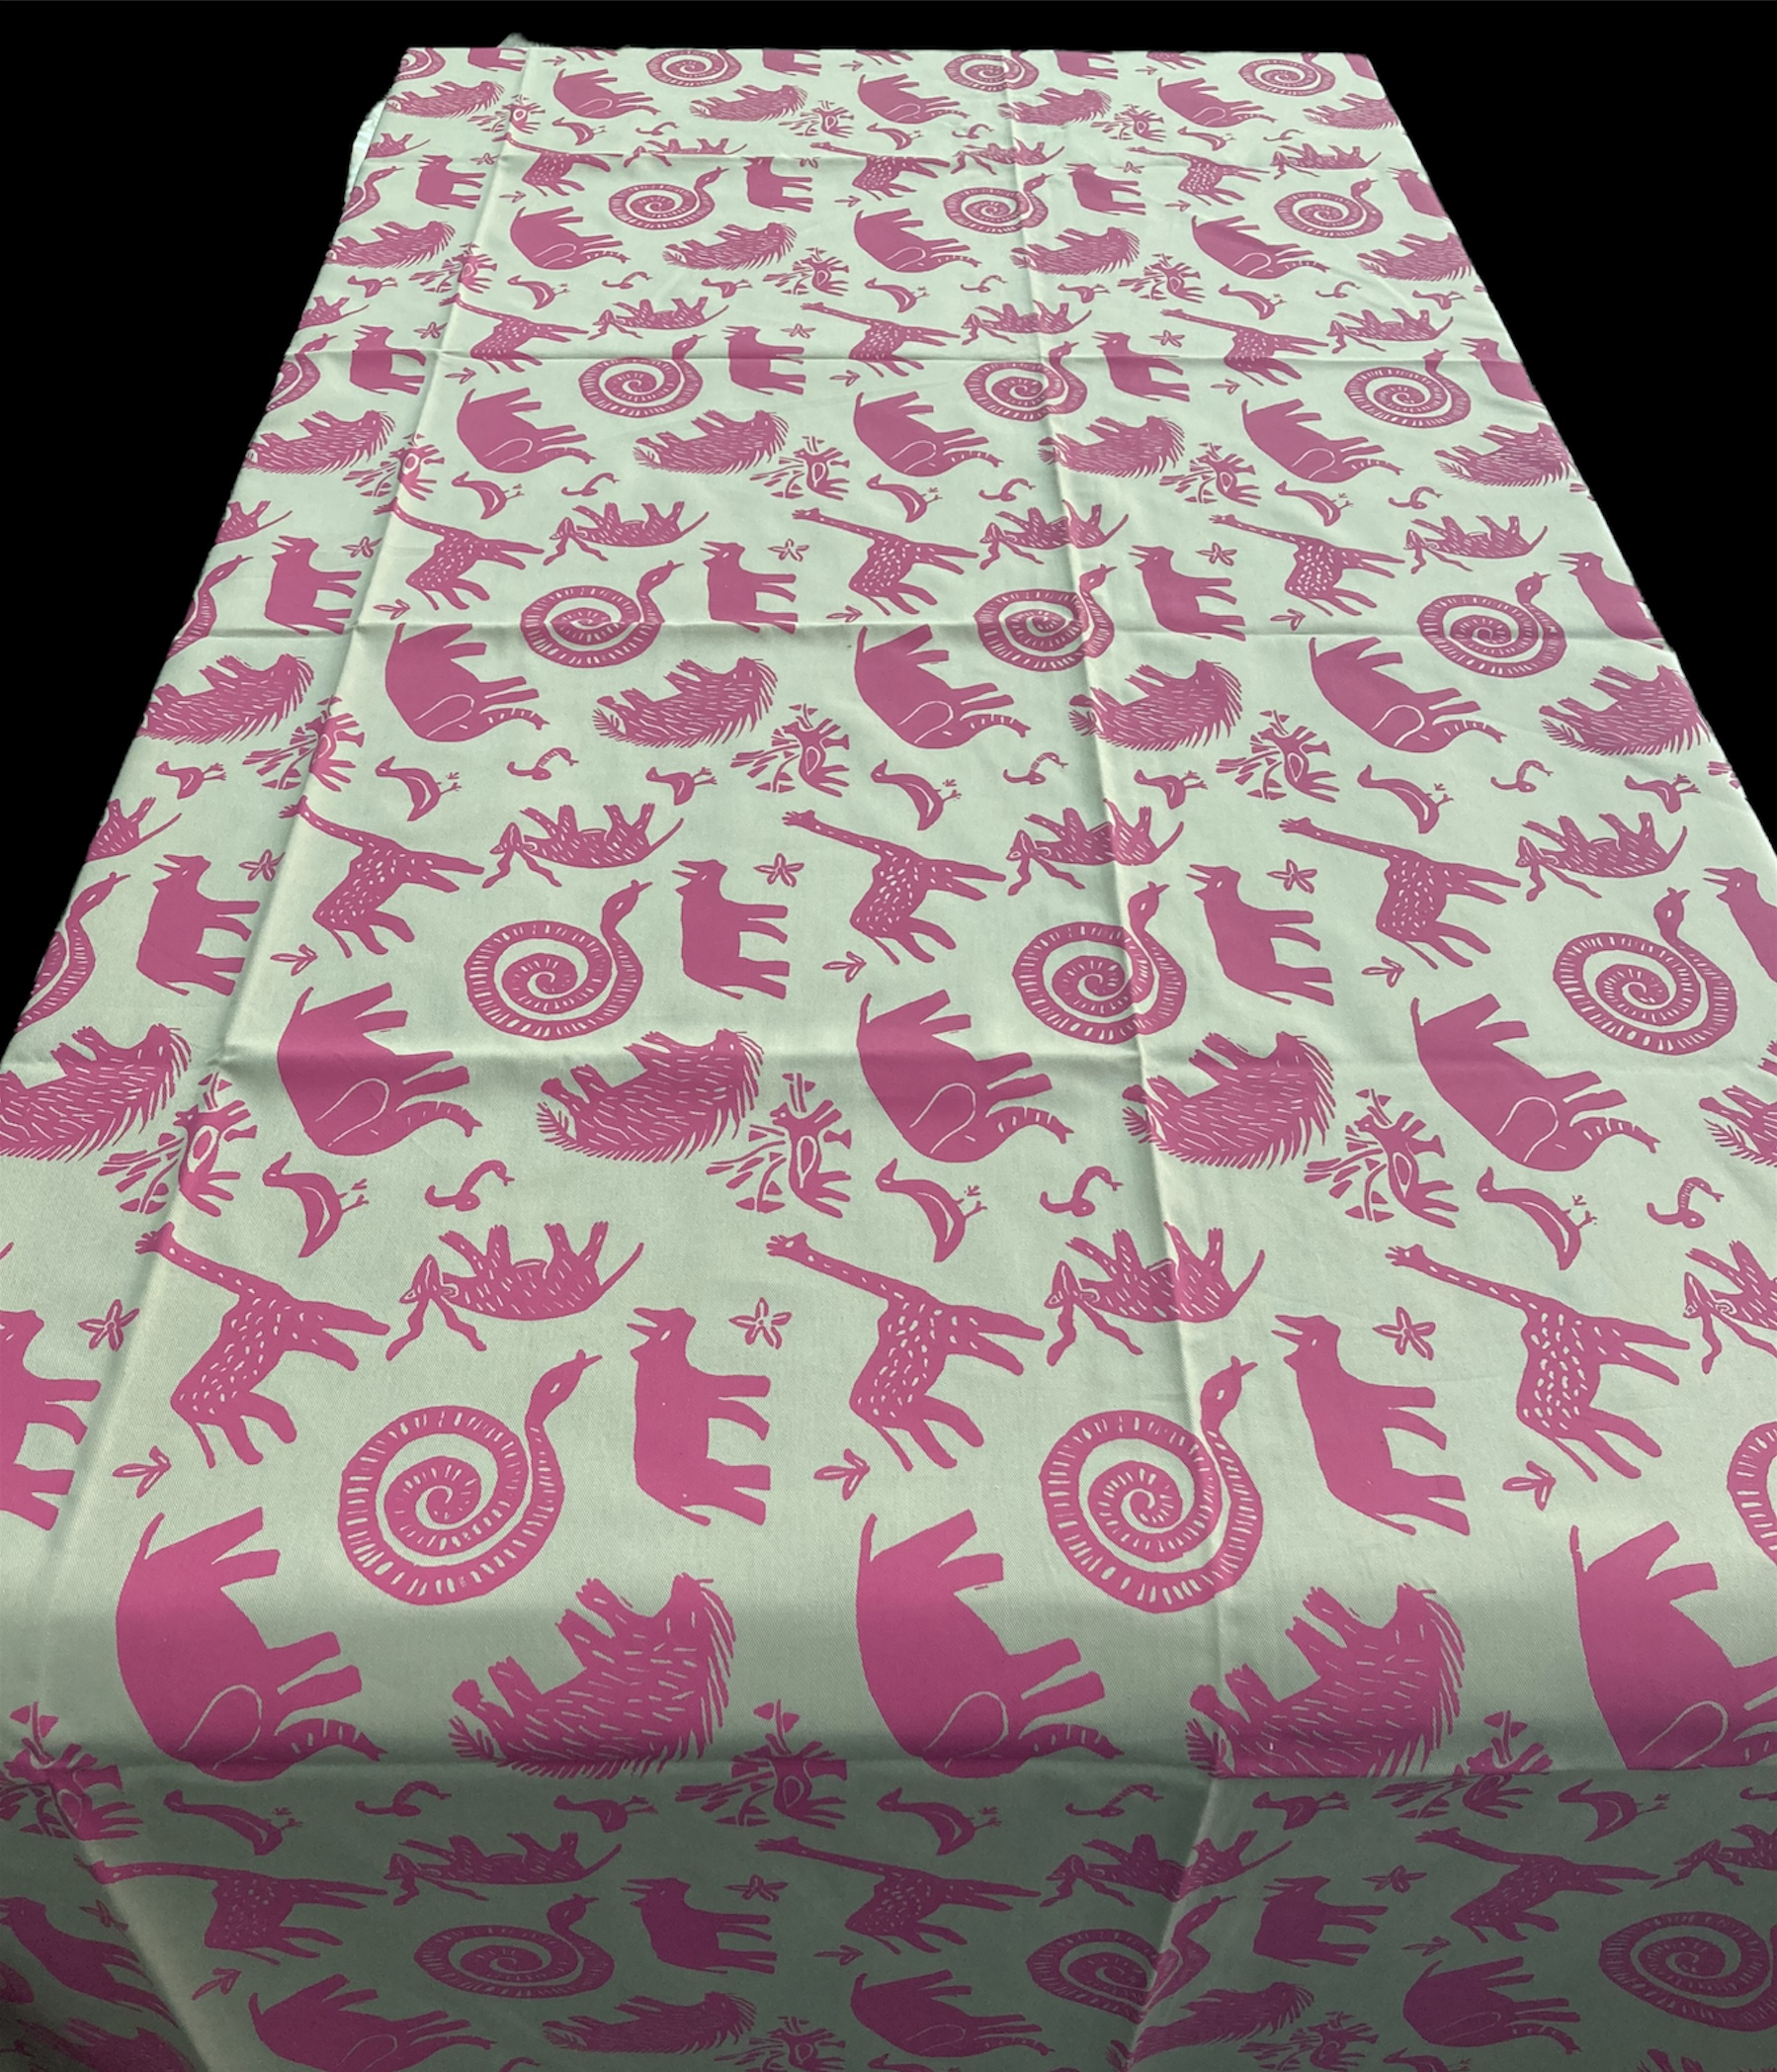 100% cotton Tablecloth approx. 98" x 57" from Namibia - # p20t